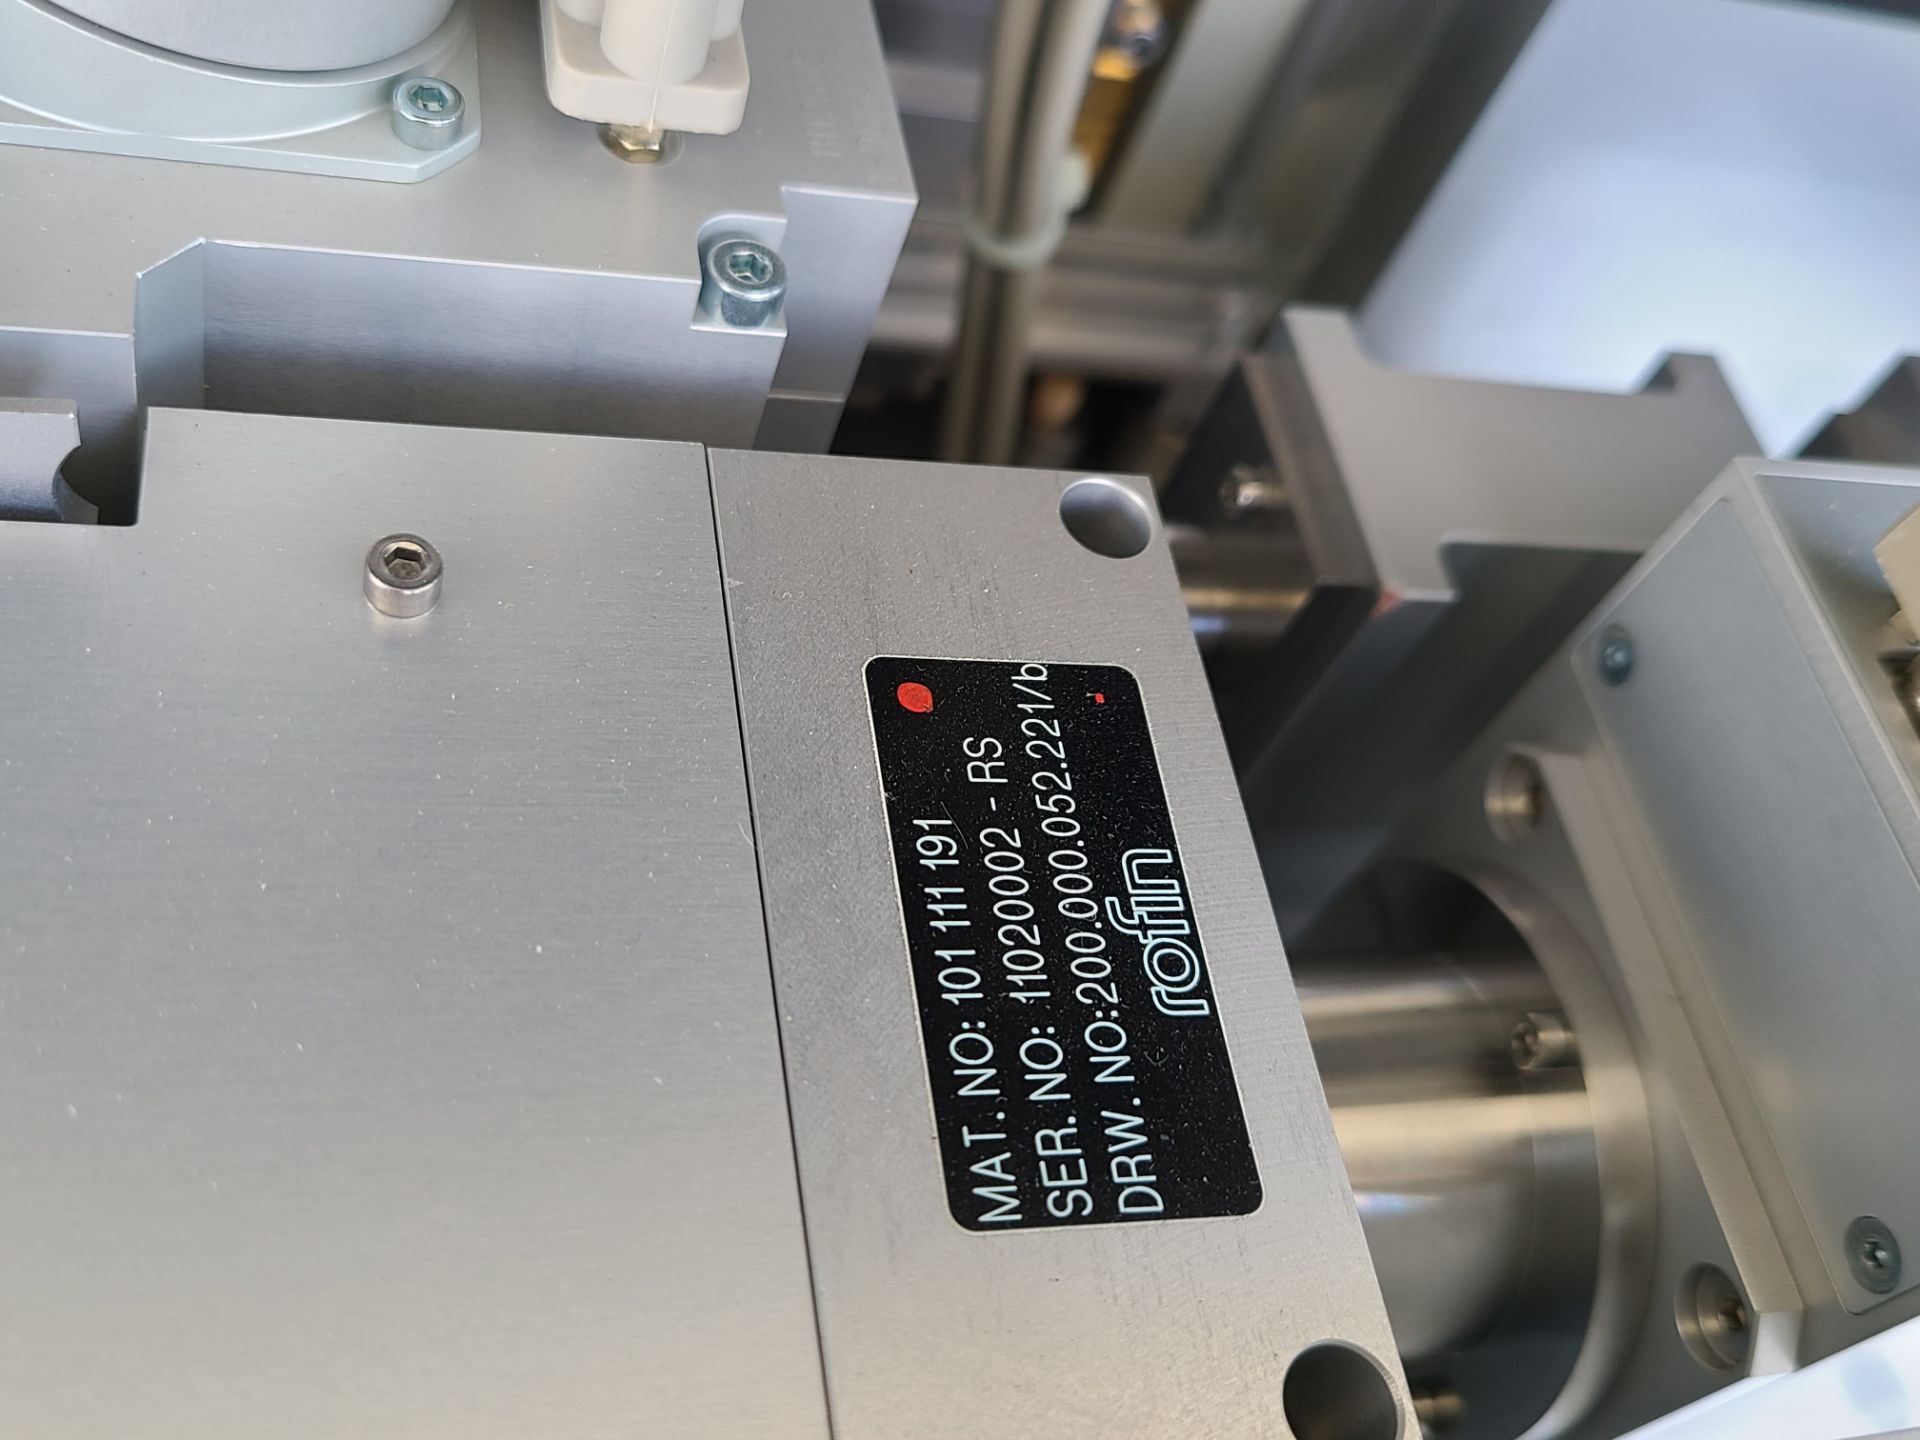 ROFIN SINAR DQ X80 DIODE PUMPED SOLID STATE LASER EDGE DELETION YAG SYSTEM - Image 28 of 84